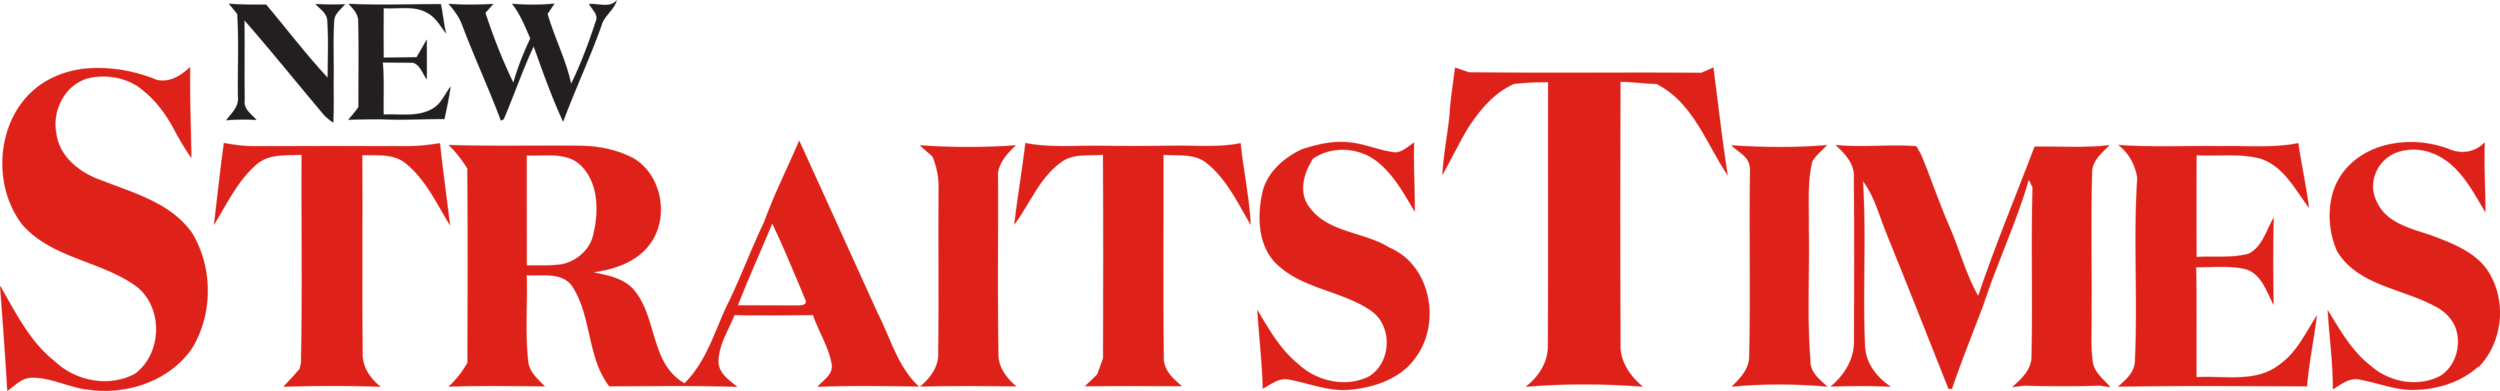 New_Straits_Times_Logo.png